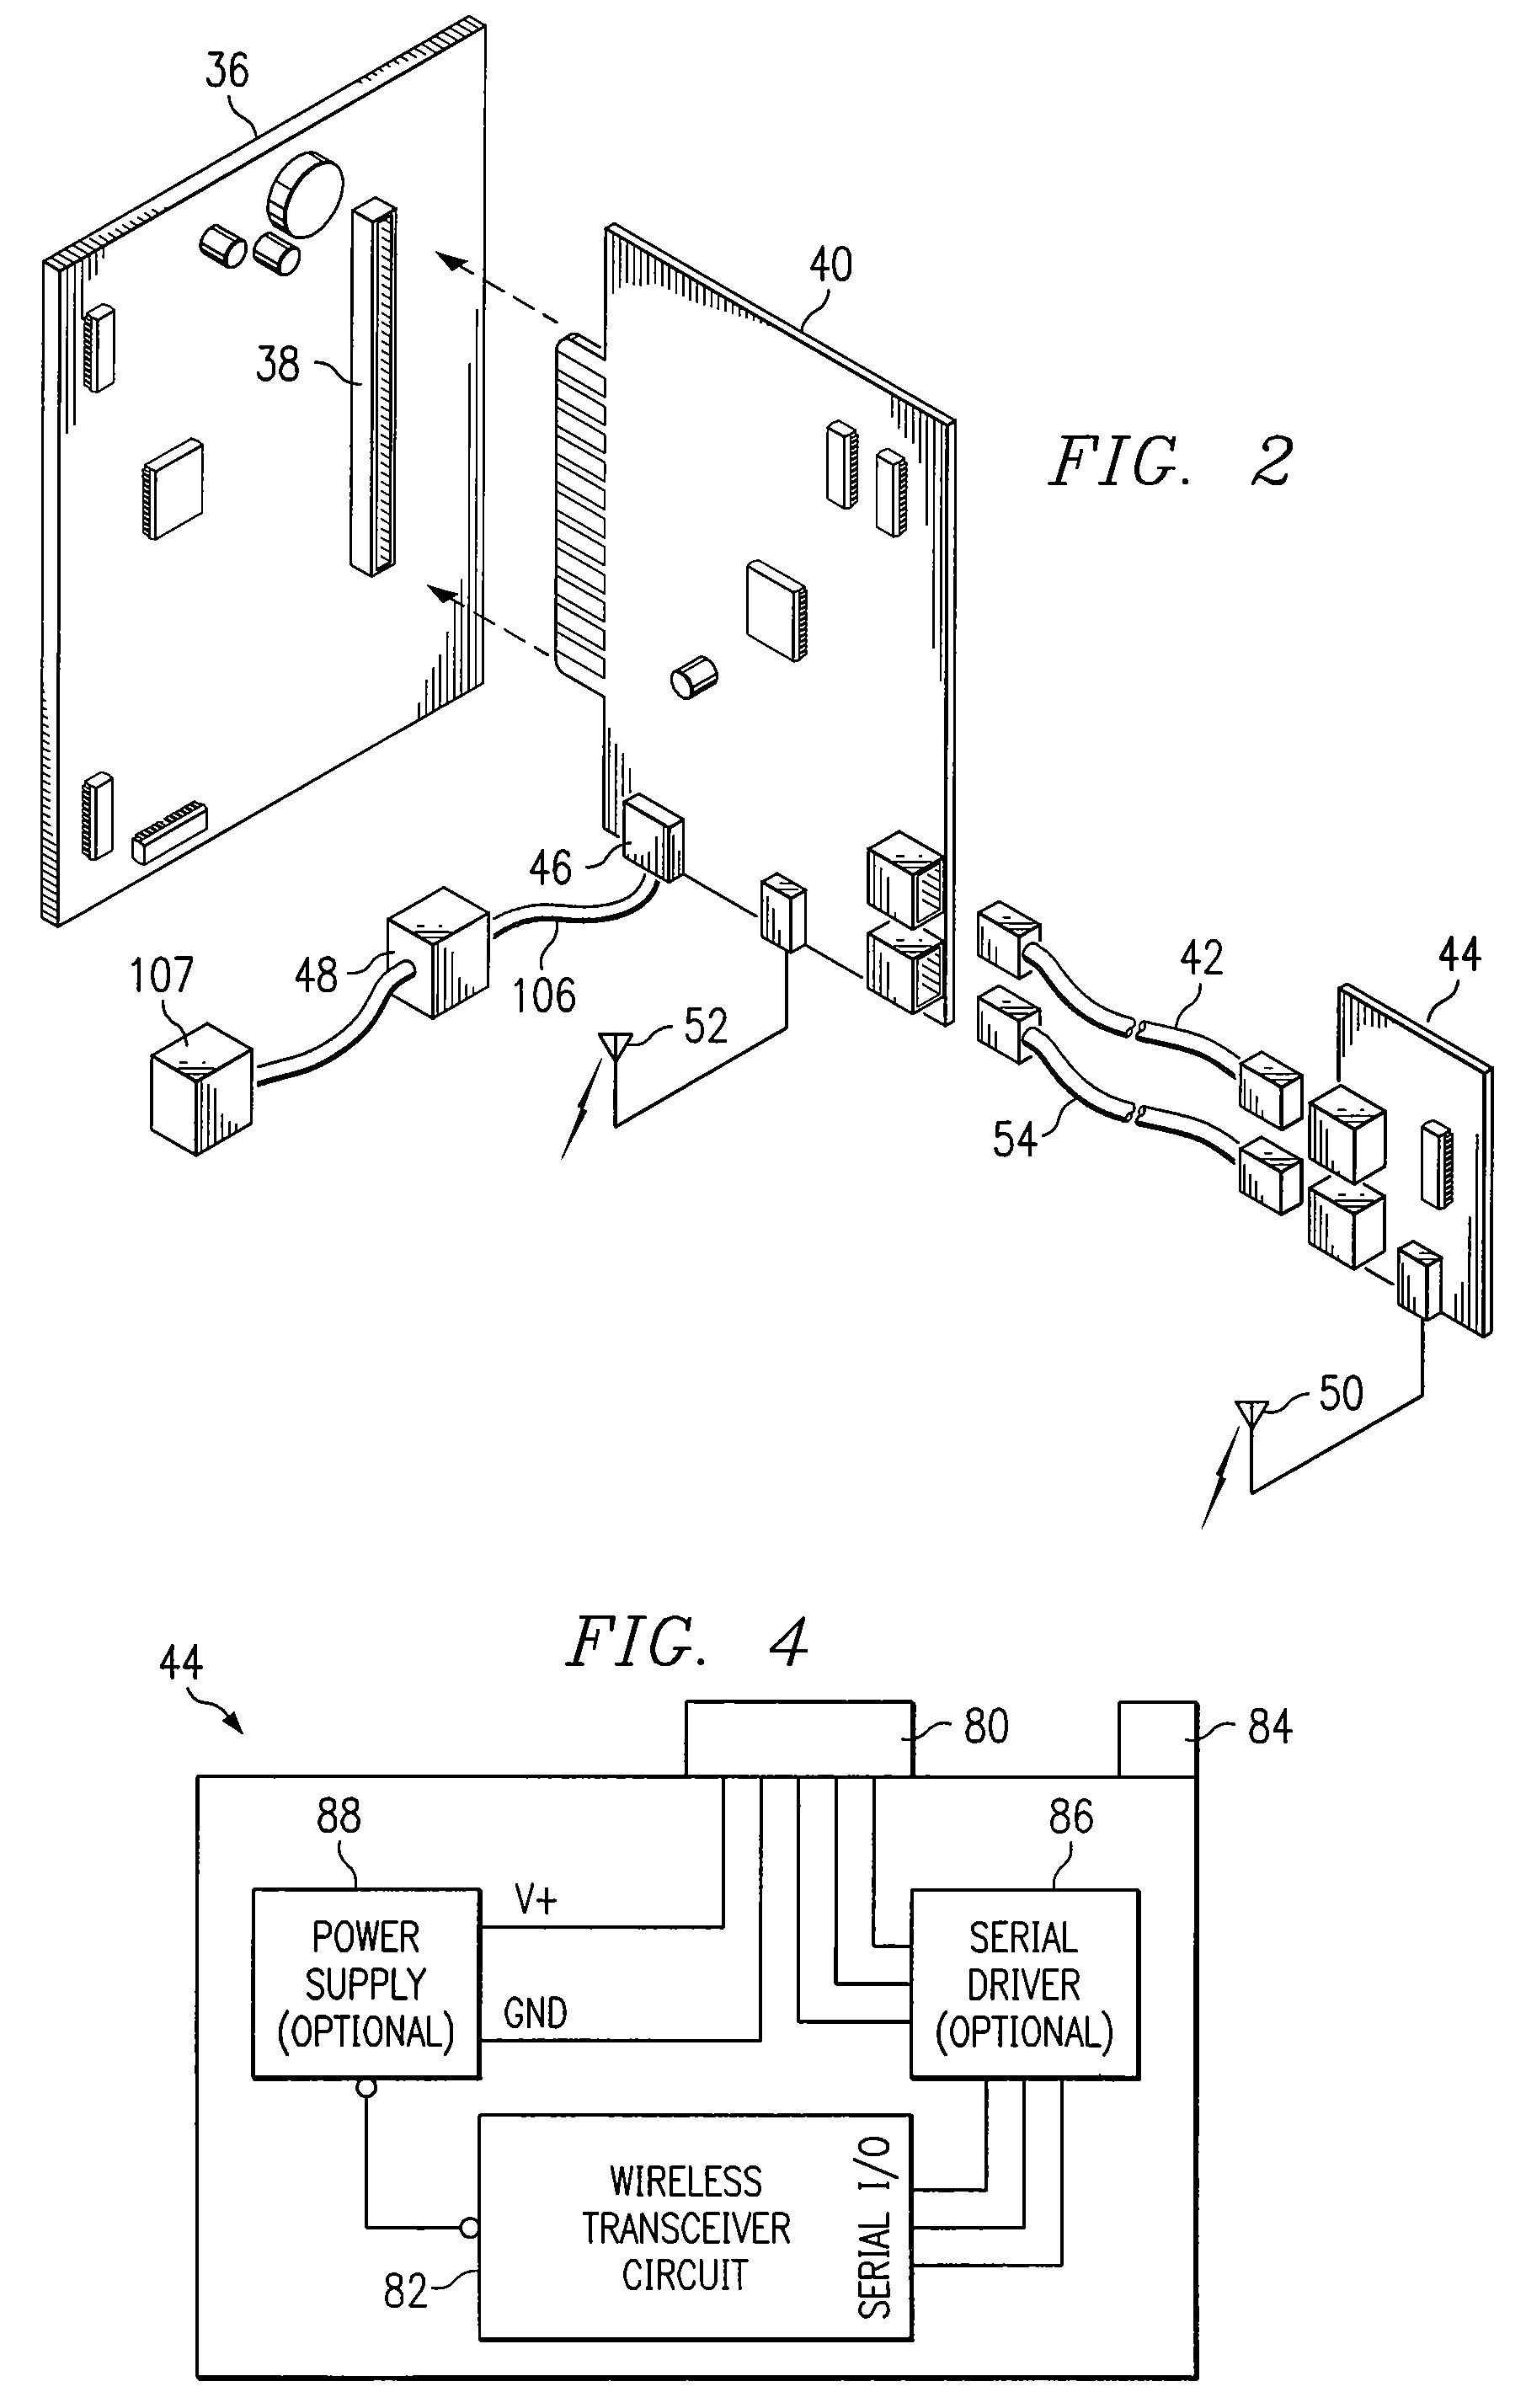 Method and System for Interfacing a Machine Controller and a Wireless Network